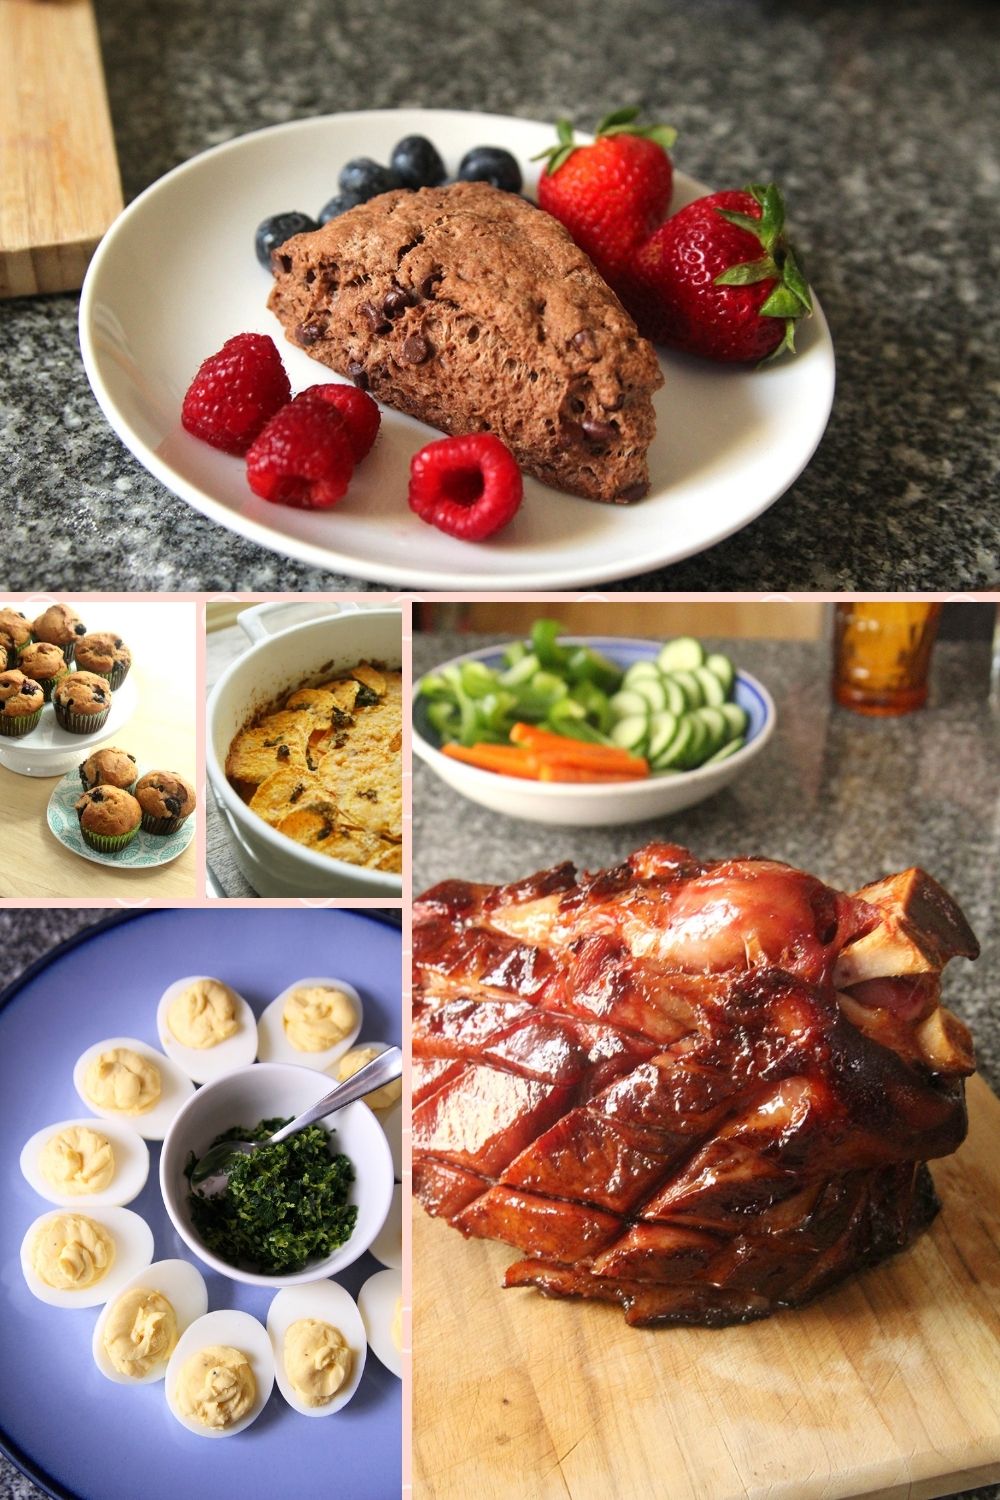 A collage of food photos is shown. The photos include double chocolate scones on a white plate with raspberries and strawberries, banana blueberry muffins, sweet potato gratin, a glazed ham and deviled eggs with a green herb sprinkle.